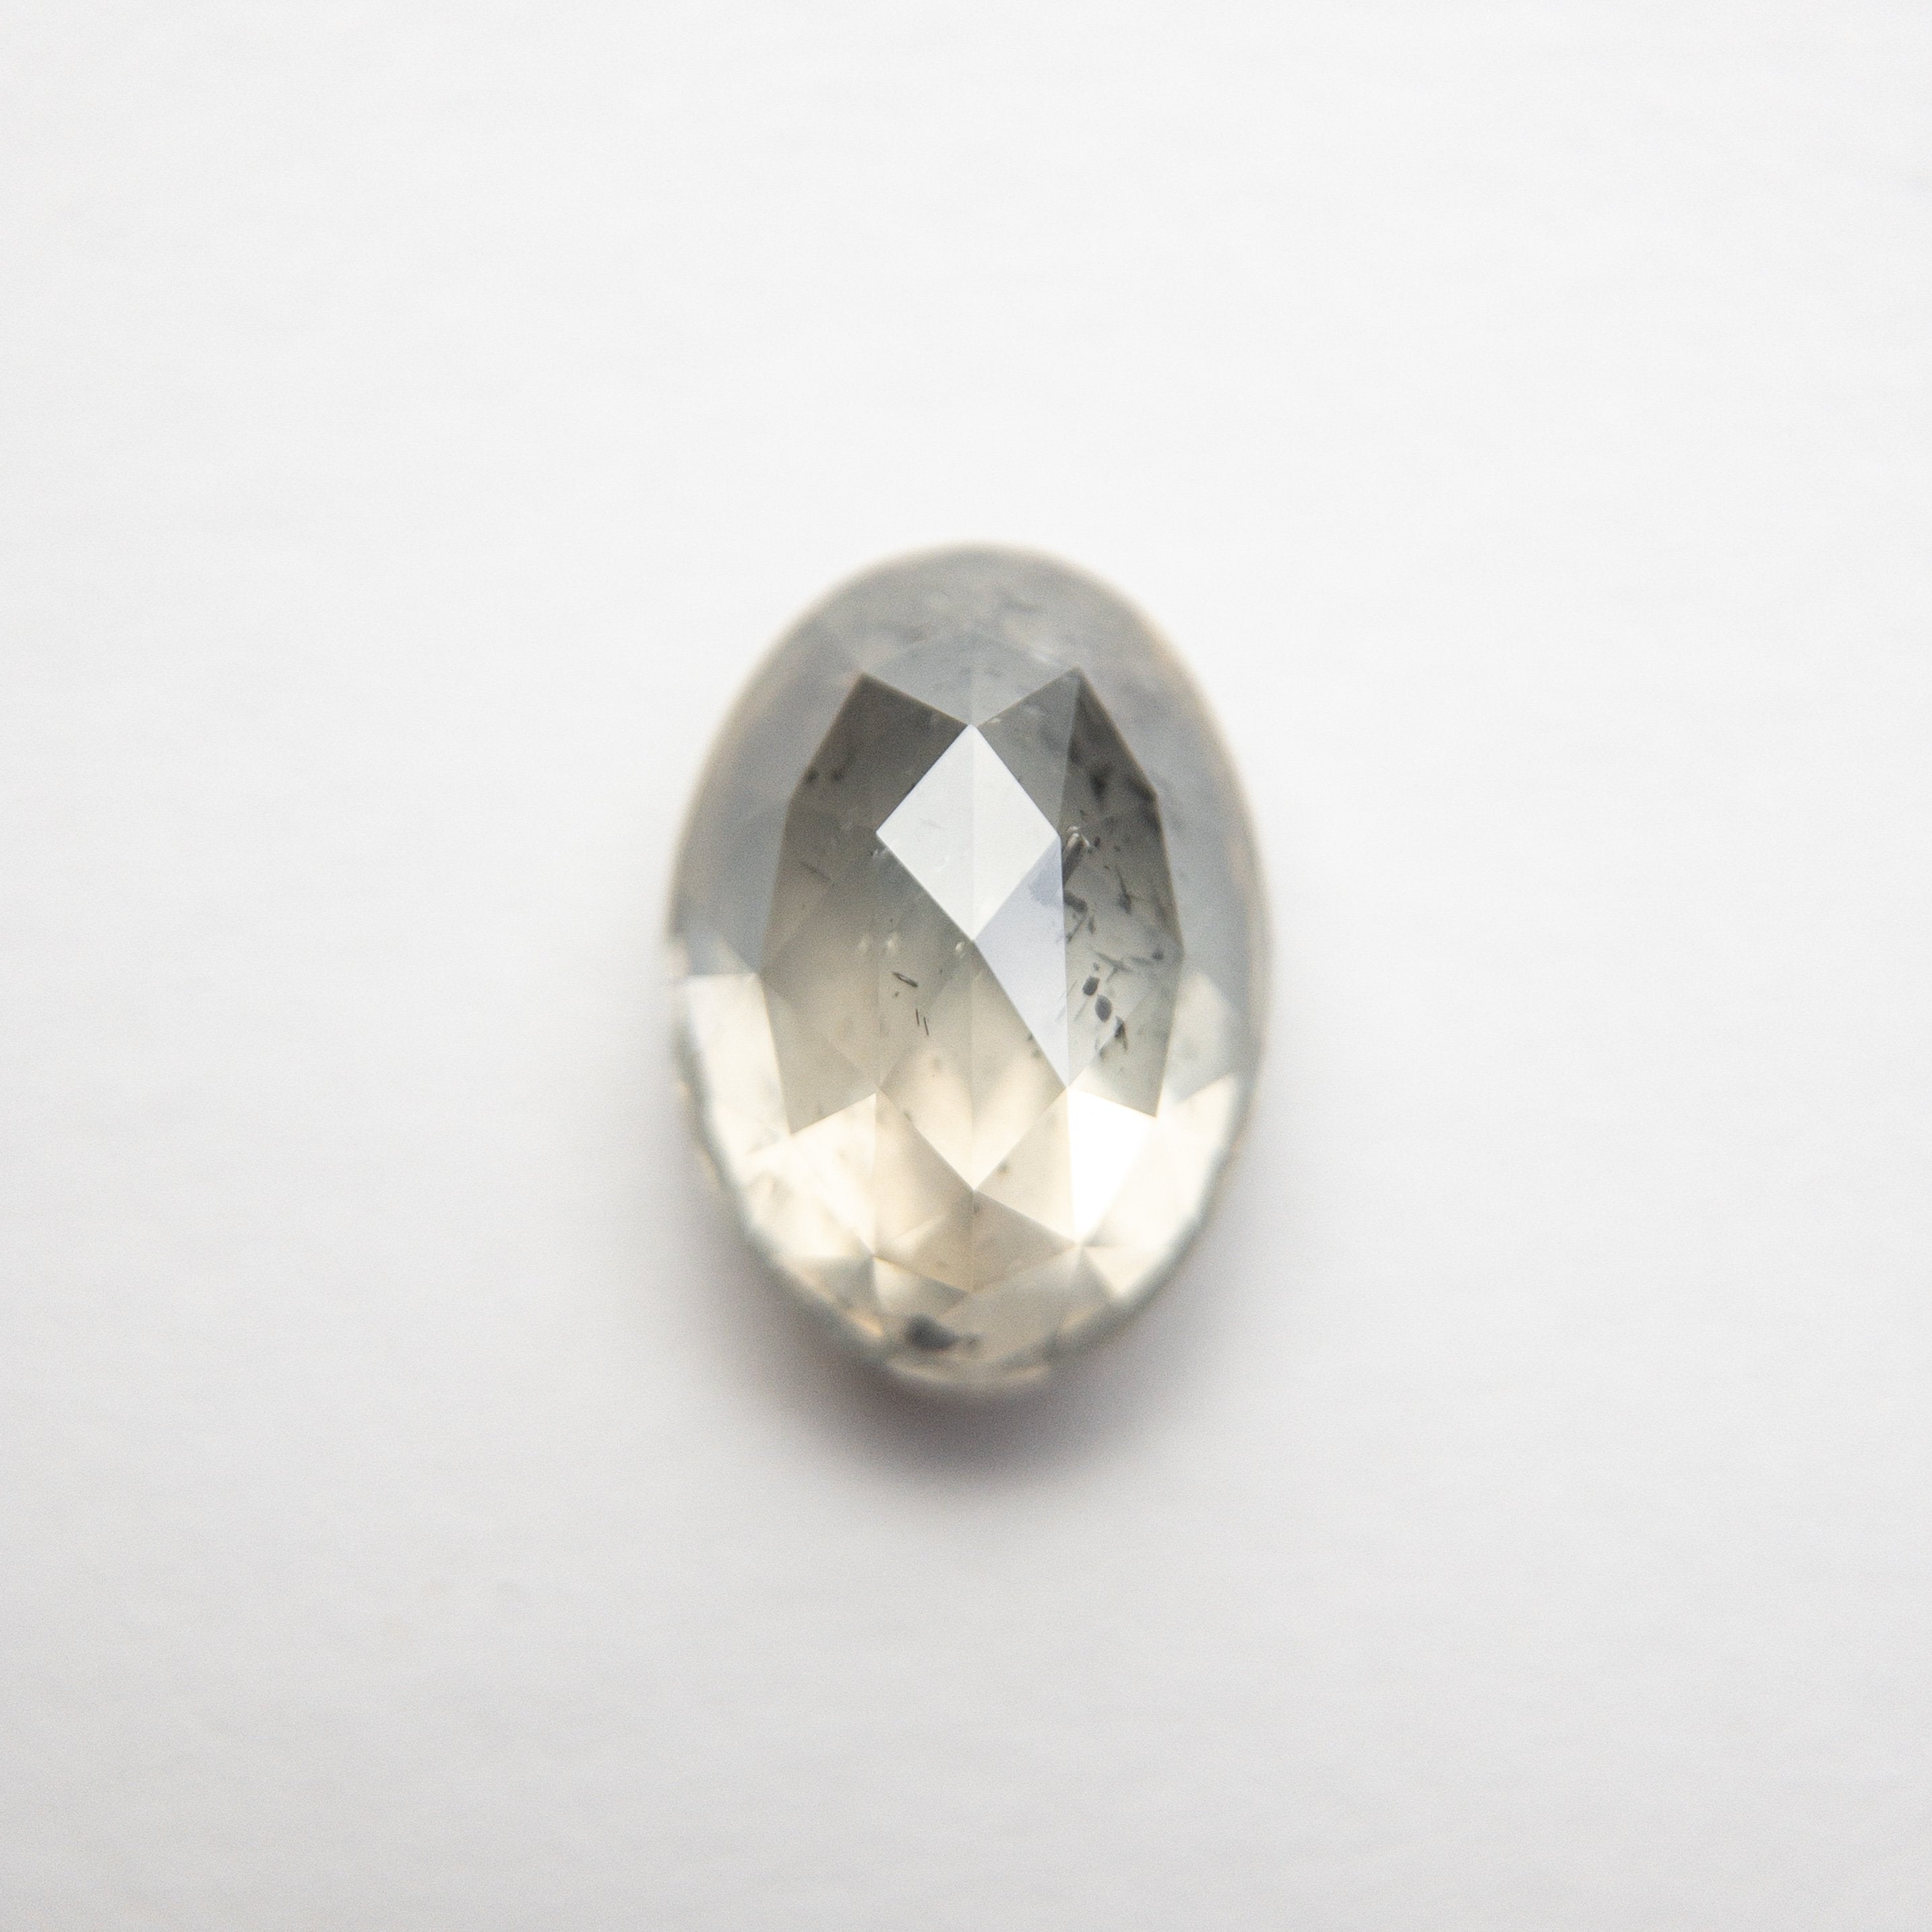 1.13ct 7.40x5.40x3.40mm Oval Double Cut 18489-04